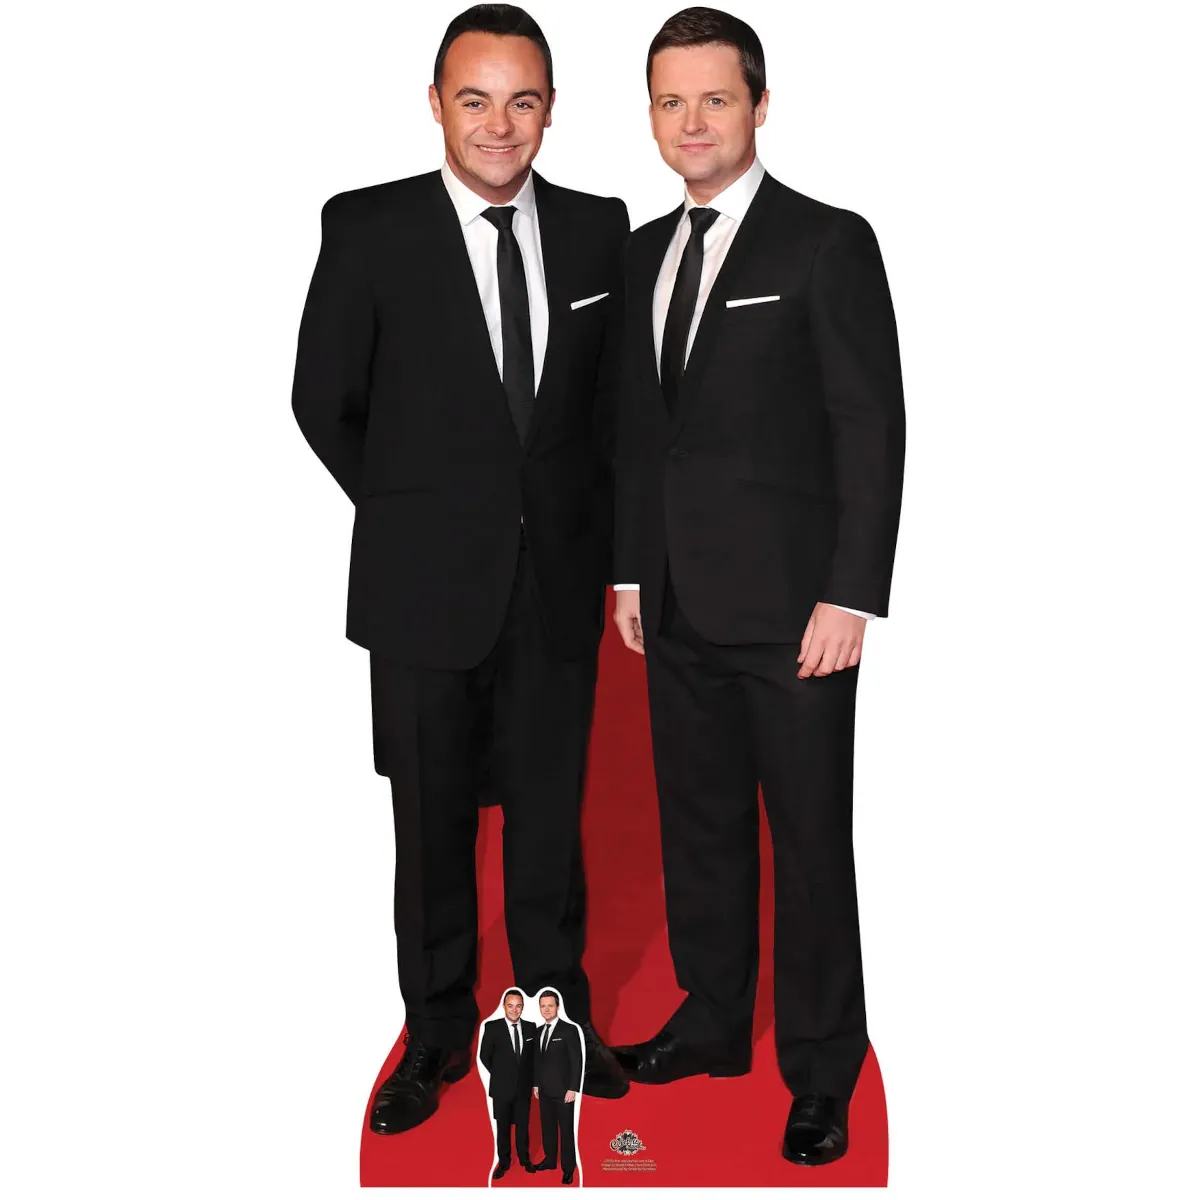 CS582 Ant & Dec 'Red Carpet' (Television Presenters) Lifesize + Mini Cardboard Cutout Standee Front